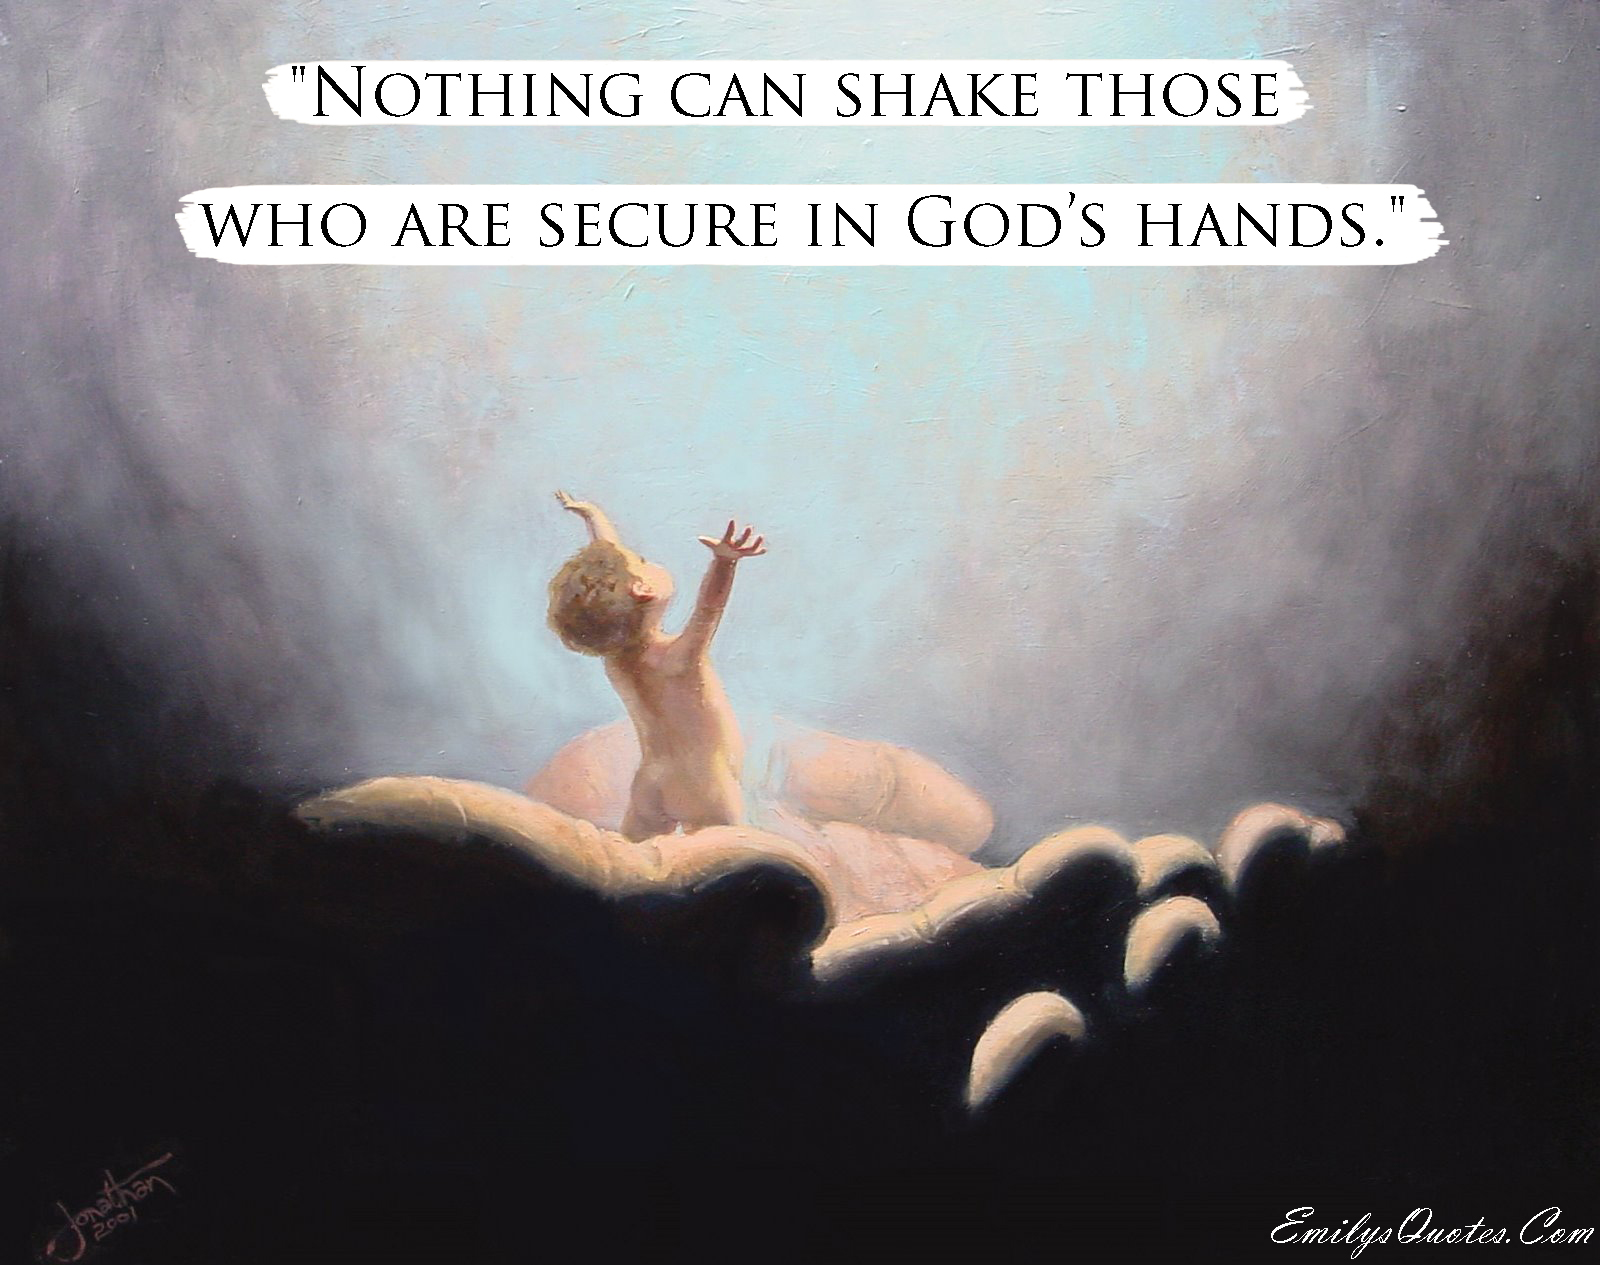 Nothing can shake those who are secure in God’s hands